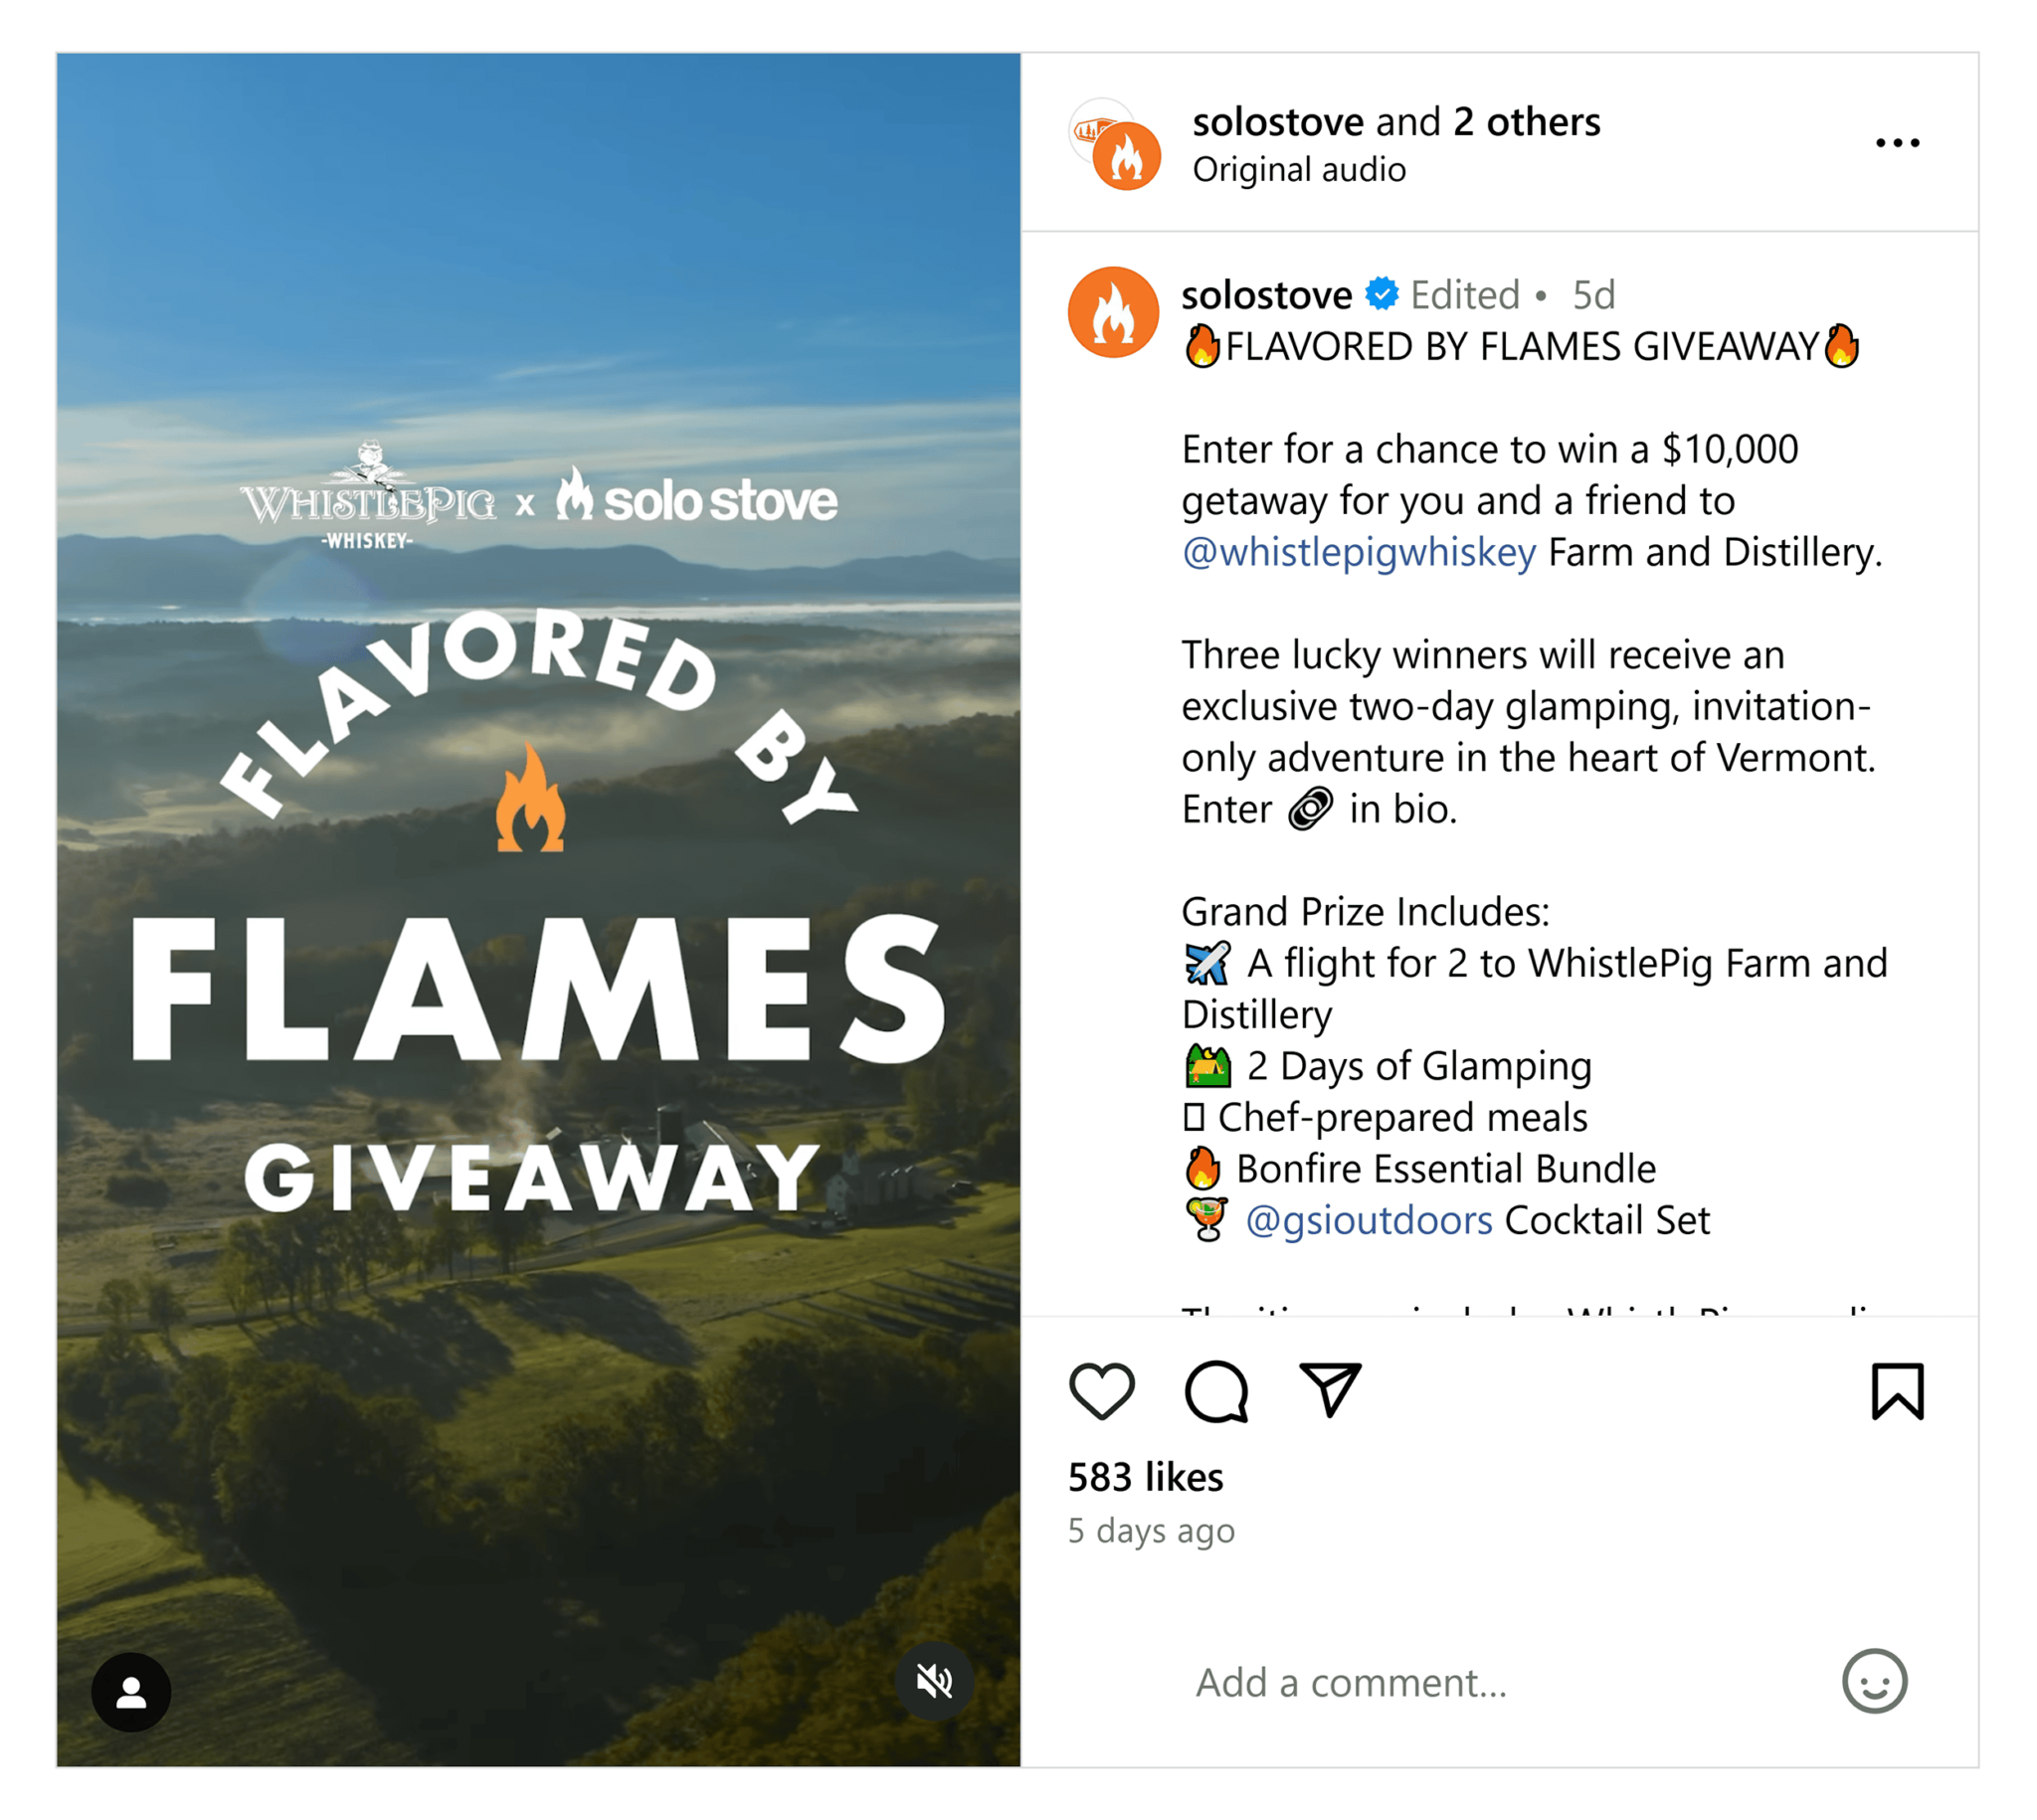 instagram-solostove-giveaway Ecommerce Marketing: 11 Strategies to Drive Traffic and Sales